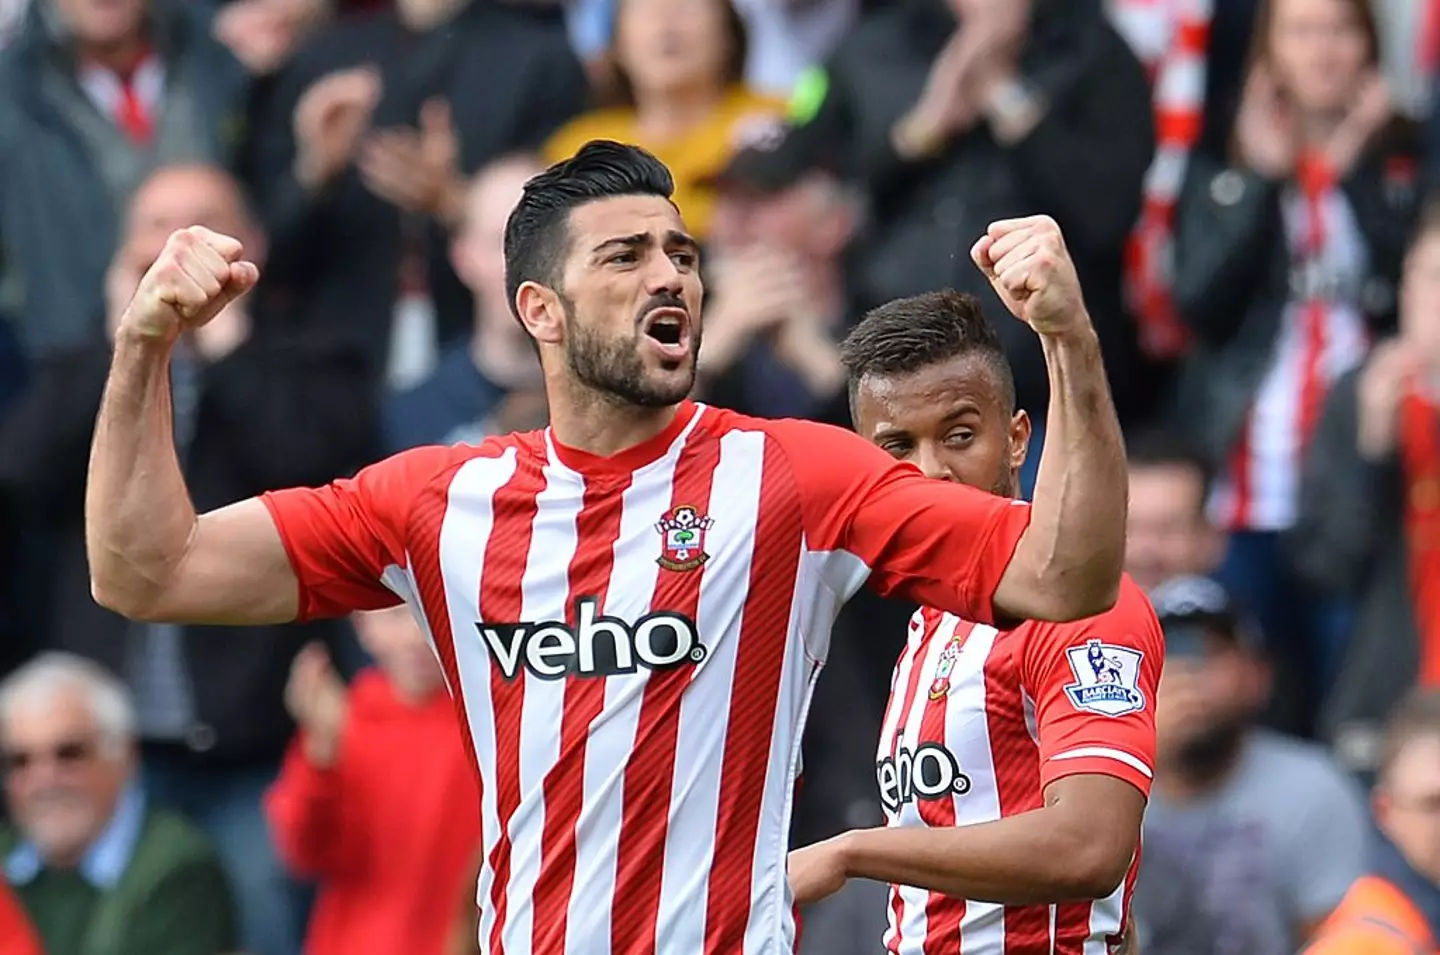 Graziano Pelle celebrates after scoring a goal for Southampton (